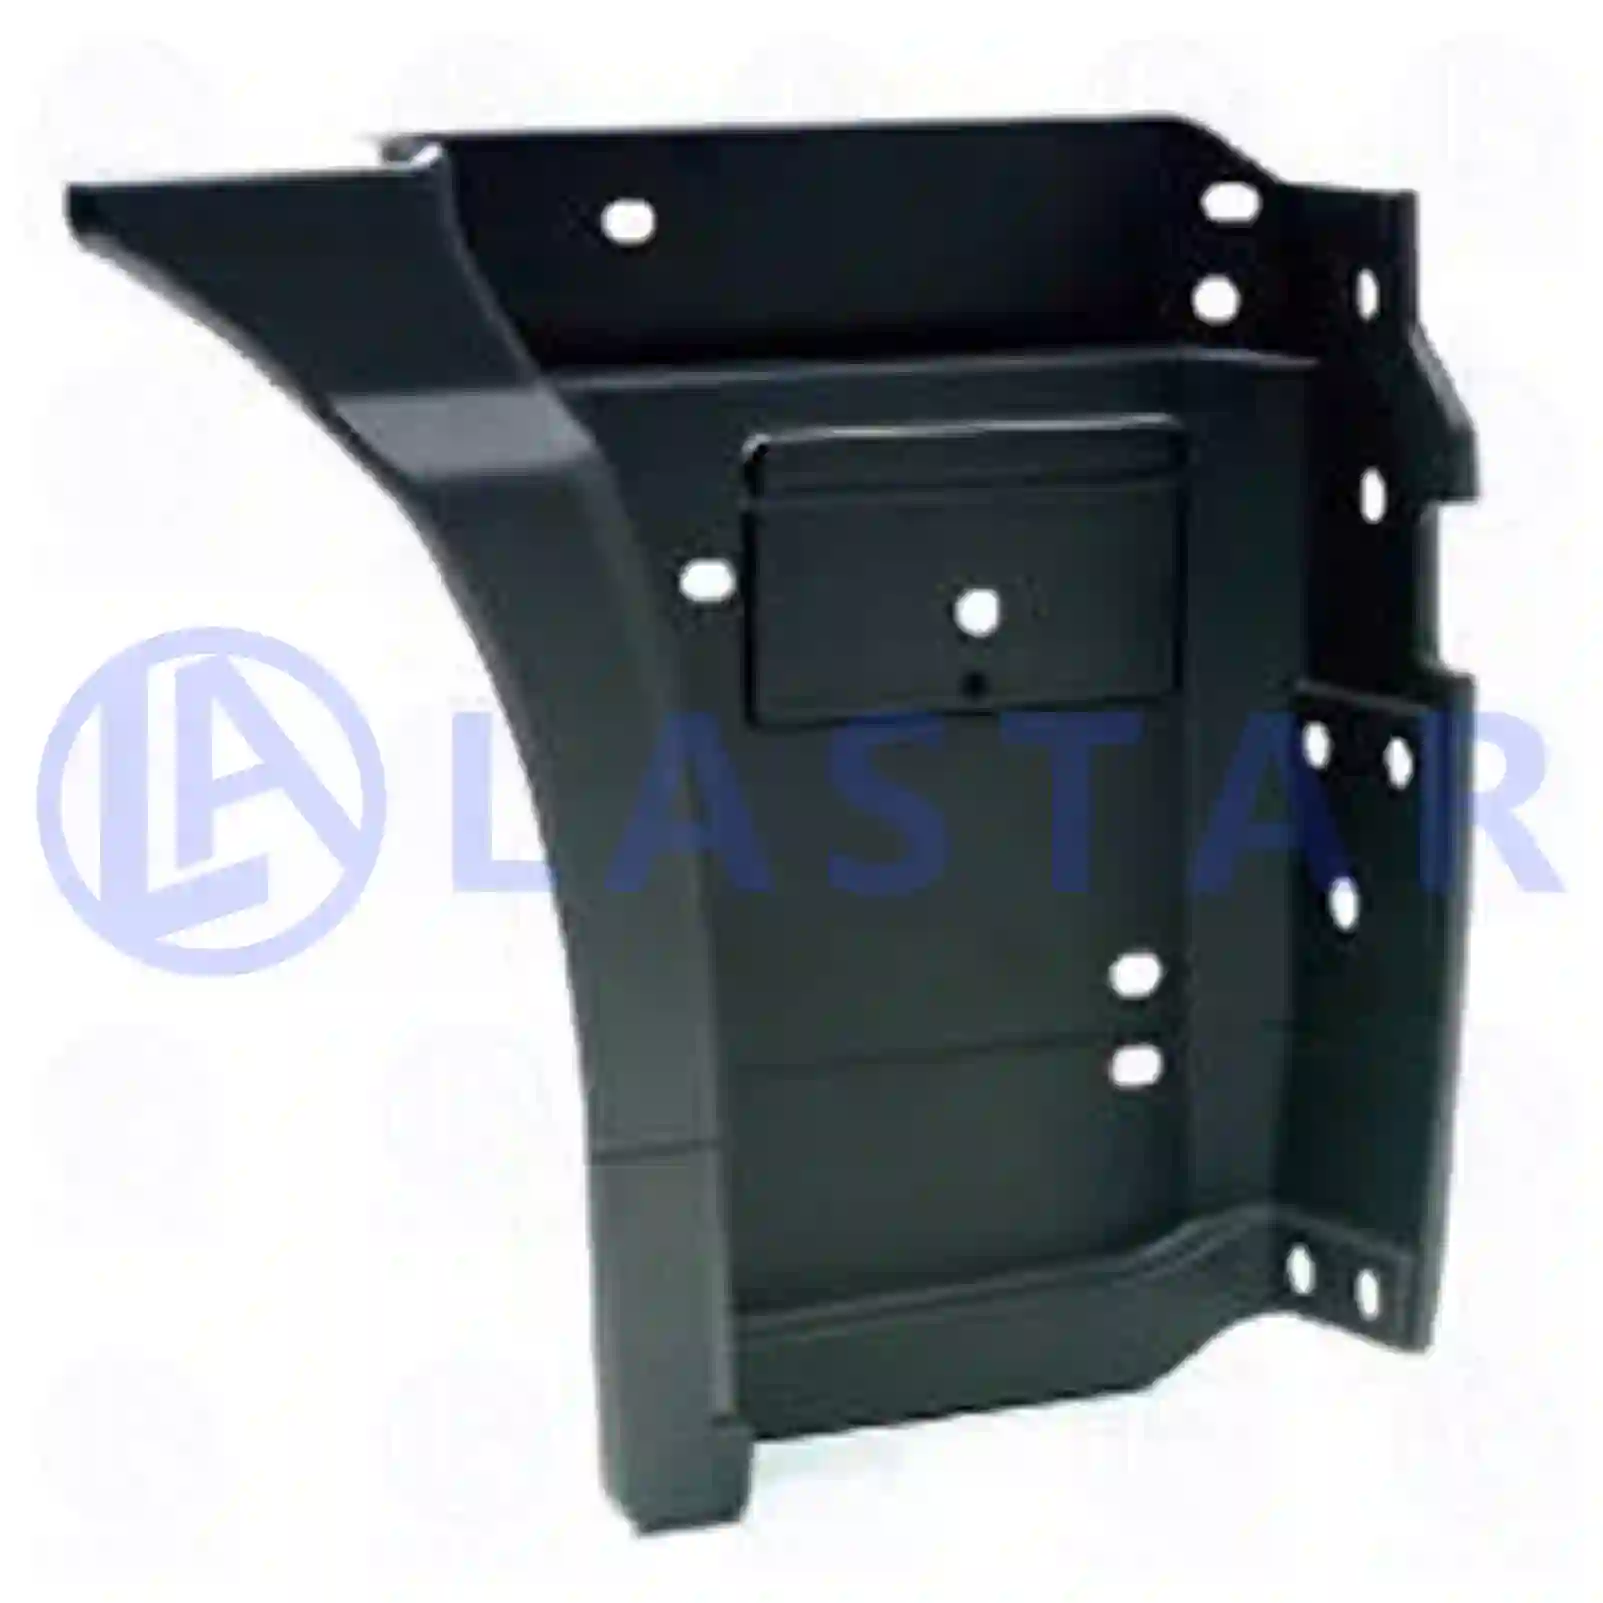 Step well case, right, 77718832, 9416600501, 94166005017C72 ||  77718832 Lastar Spare Part | Truck Spare Parts, Auotomotive Spare Parts Step well case, right, 77718832, 9416600501, 94166005017C72 ||  77718832 Lastar Spare Part | Truck Spare Parts, Auotomotive Spare Parts